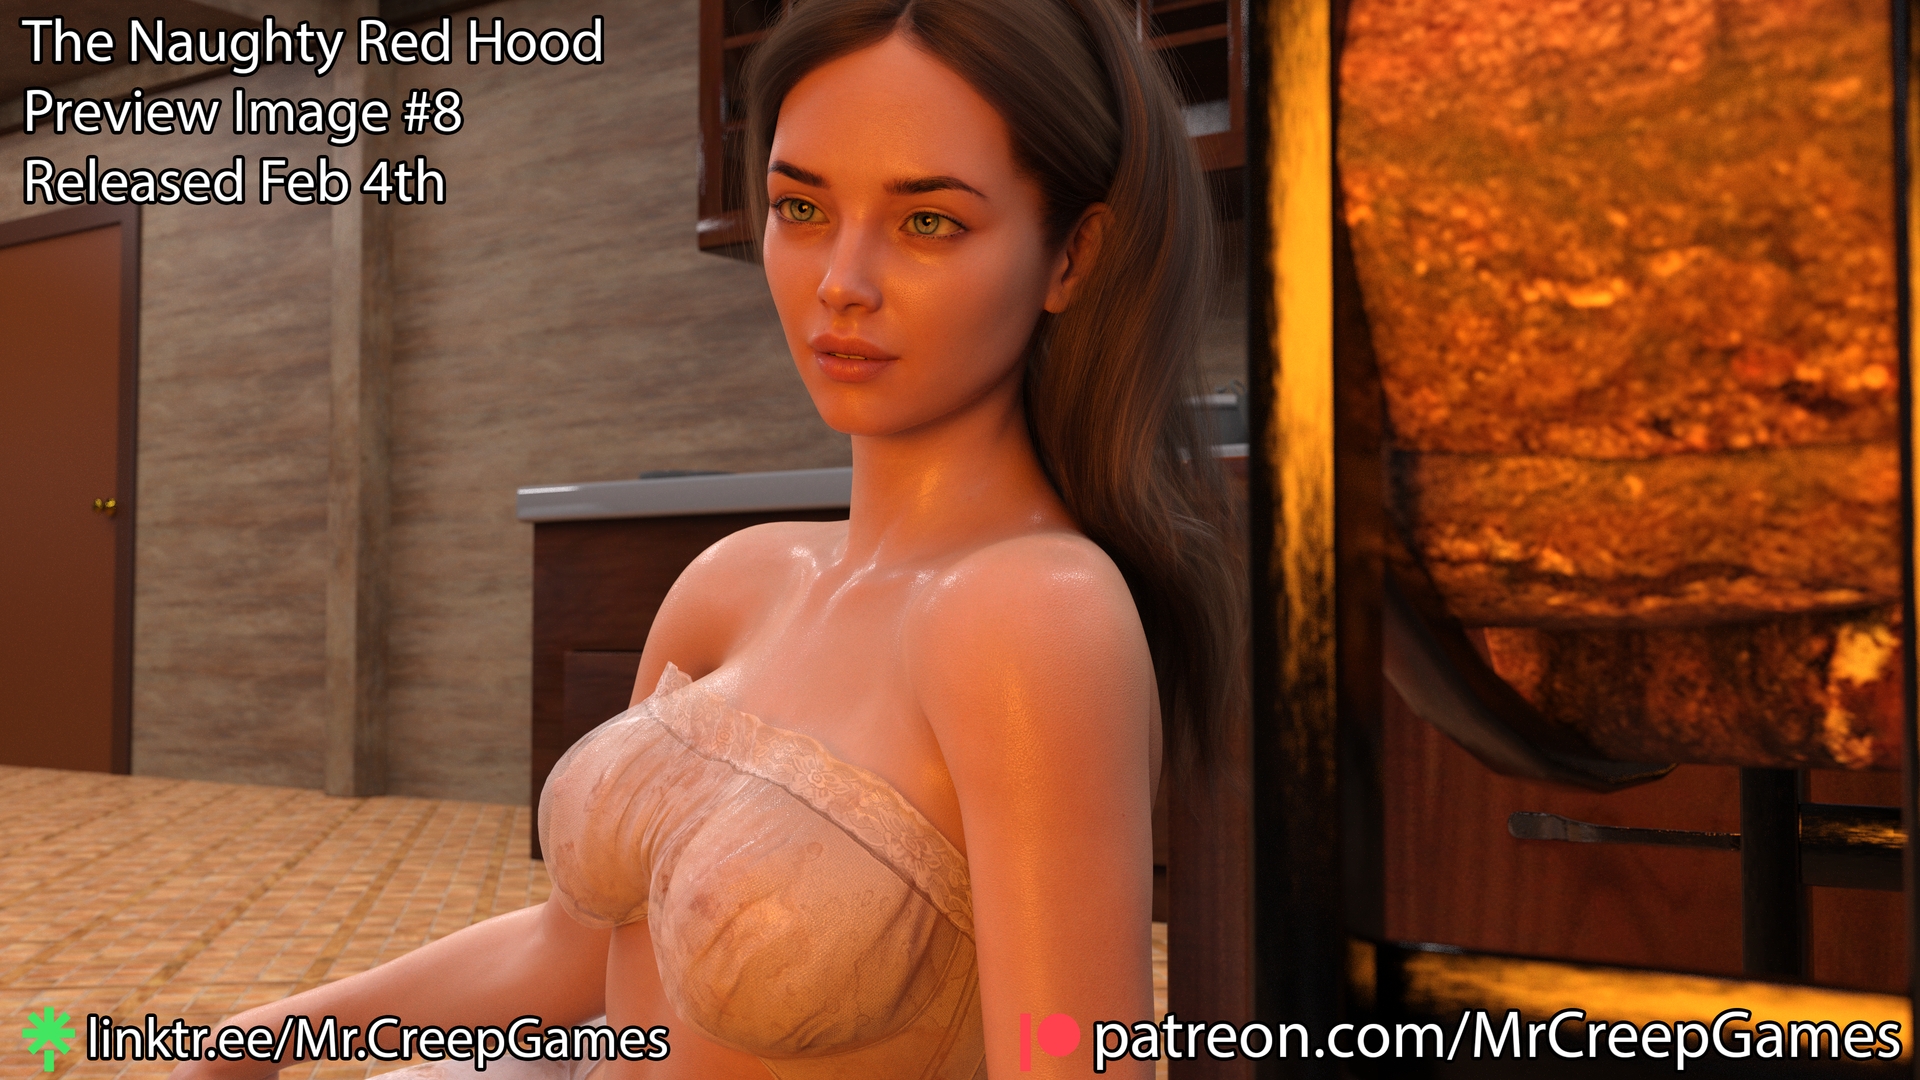 The Naughty Red Hood Preview #8  3d Porn 3d Girl Nsfw 3dnsfw Sexy Hot Nude Big boobs Pinup Pose Cute Teen